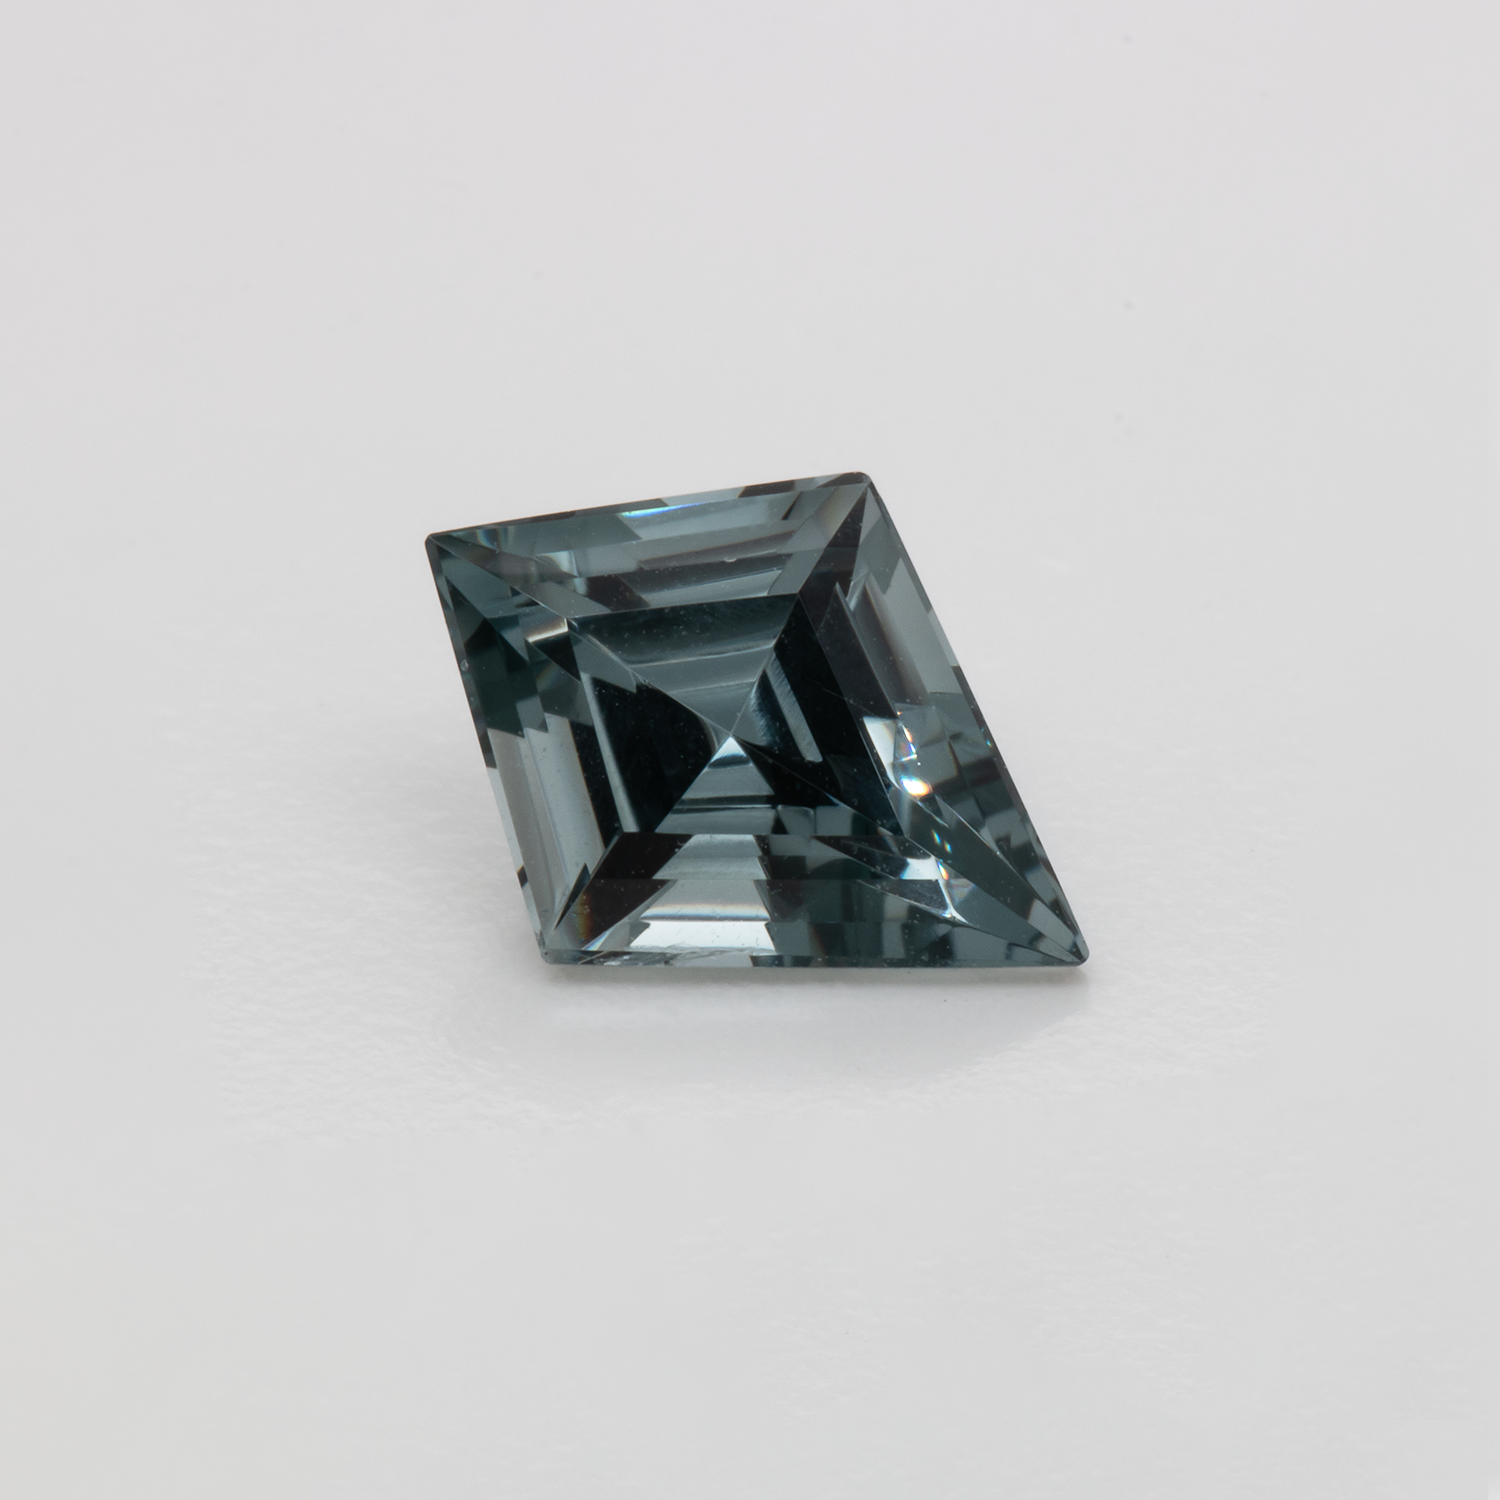 Spinel - grey, fancy, 10.5x7.9 mm, 1.74 cts, No. SP90041